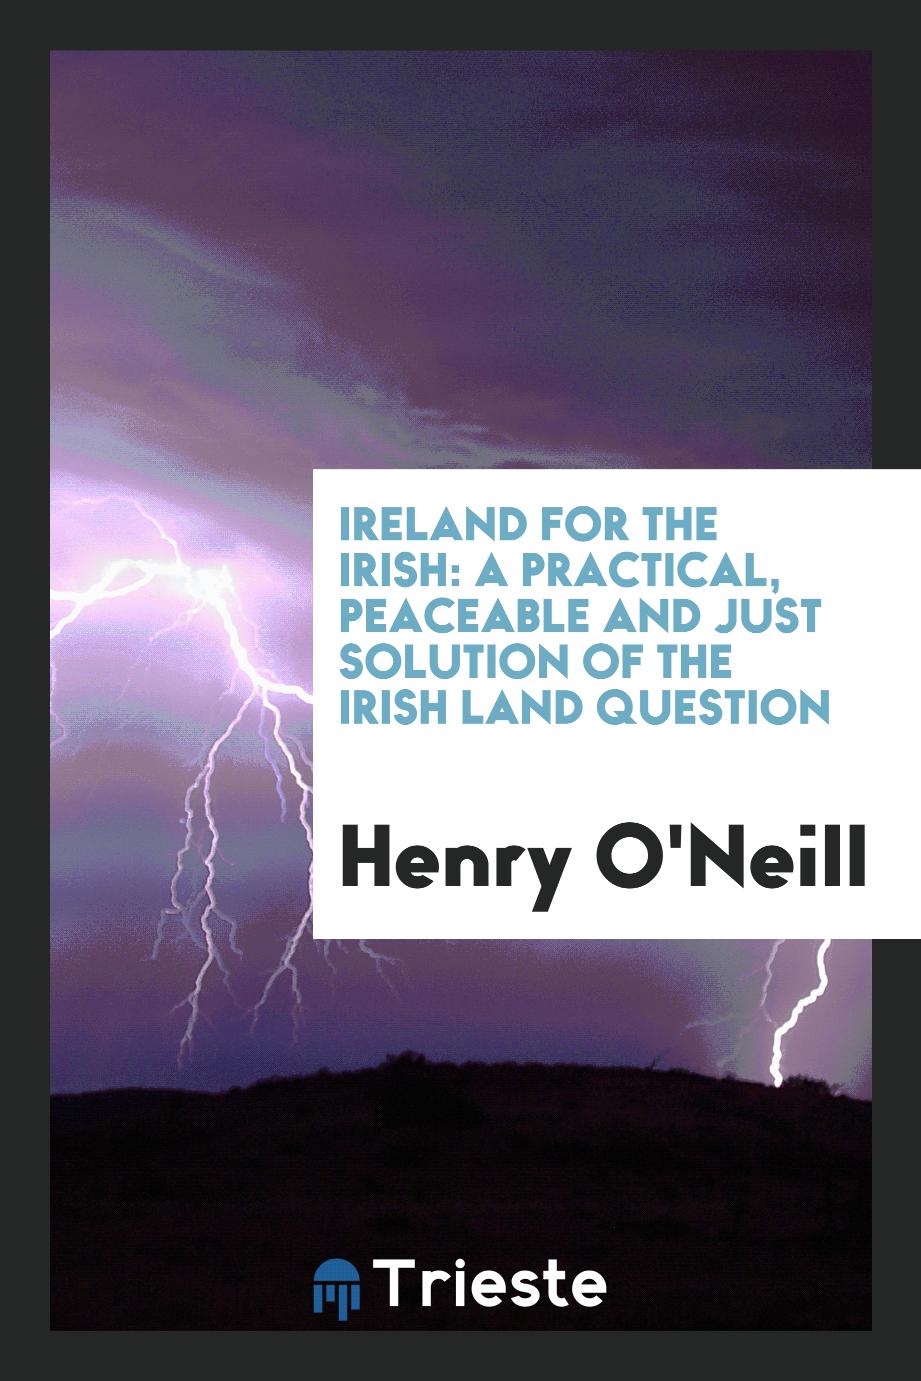 Ireland for the Irish: A Practical, Peaceable and Just Solution of the Irish Land Question